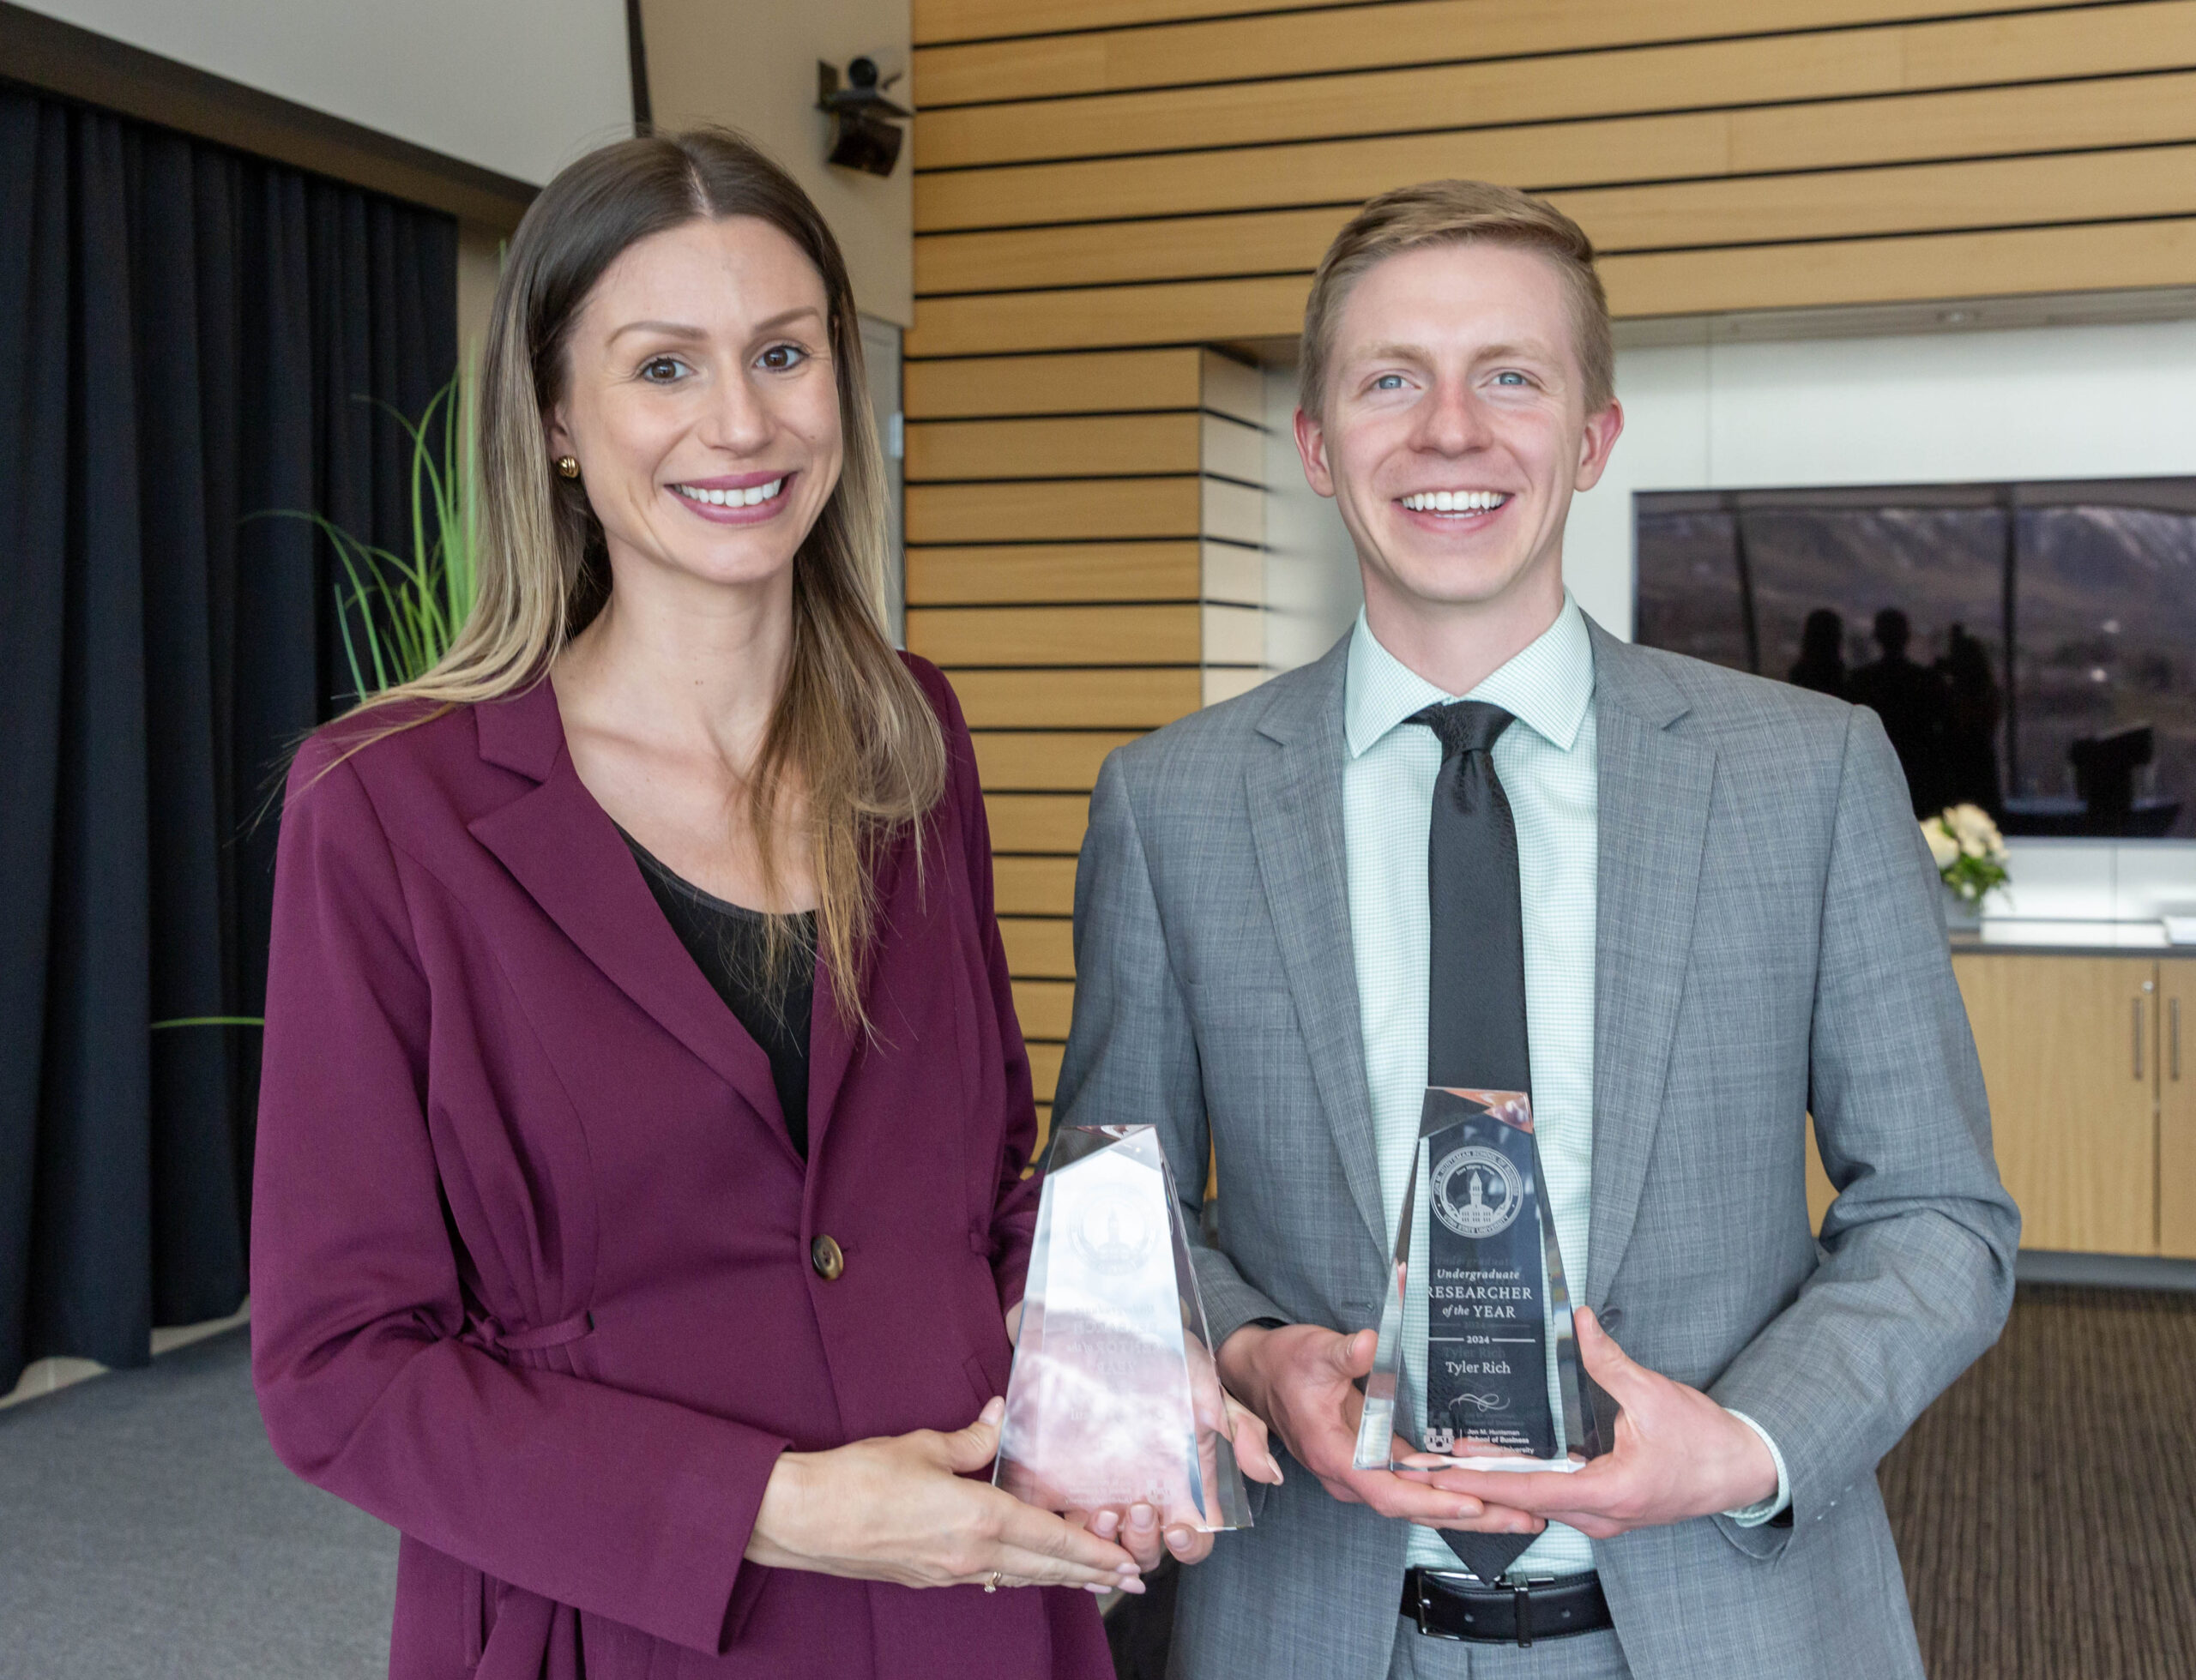 USU Professor Antje Graul received the  Faculty Undergraduate Research Mentor of the Year award from the Jon M. Huntsman School of Business. She stands with her student, Tyler Rich, while they hold their awards following the faculty awards ceremony in Logan, Utah.